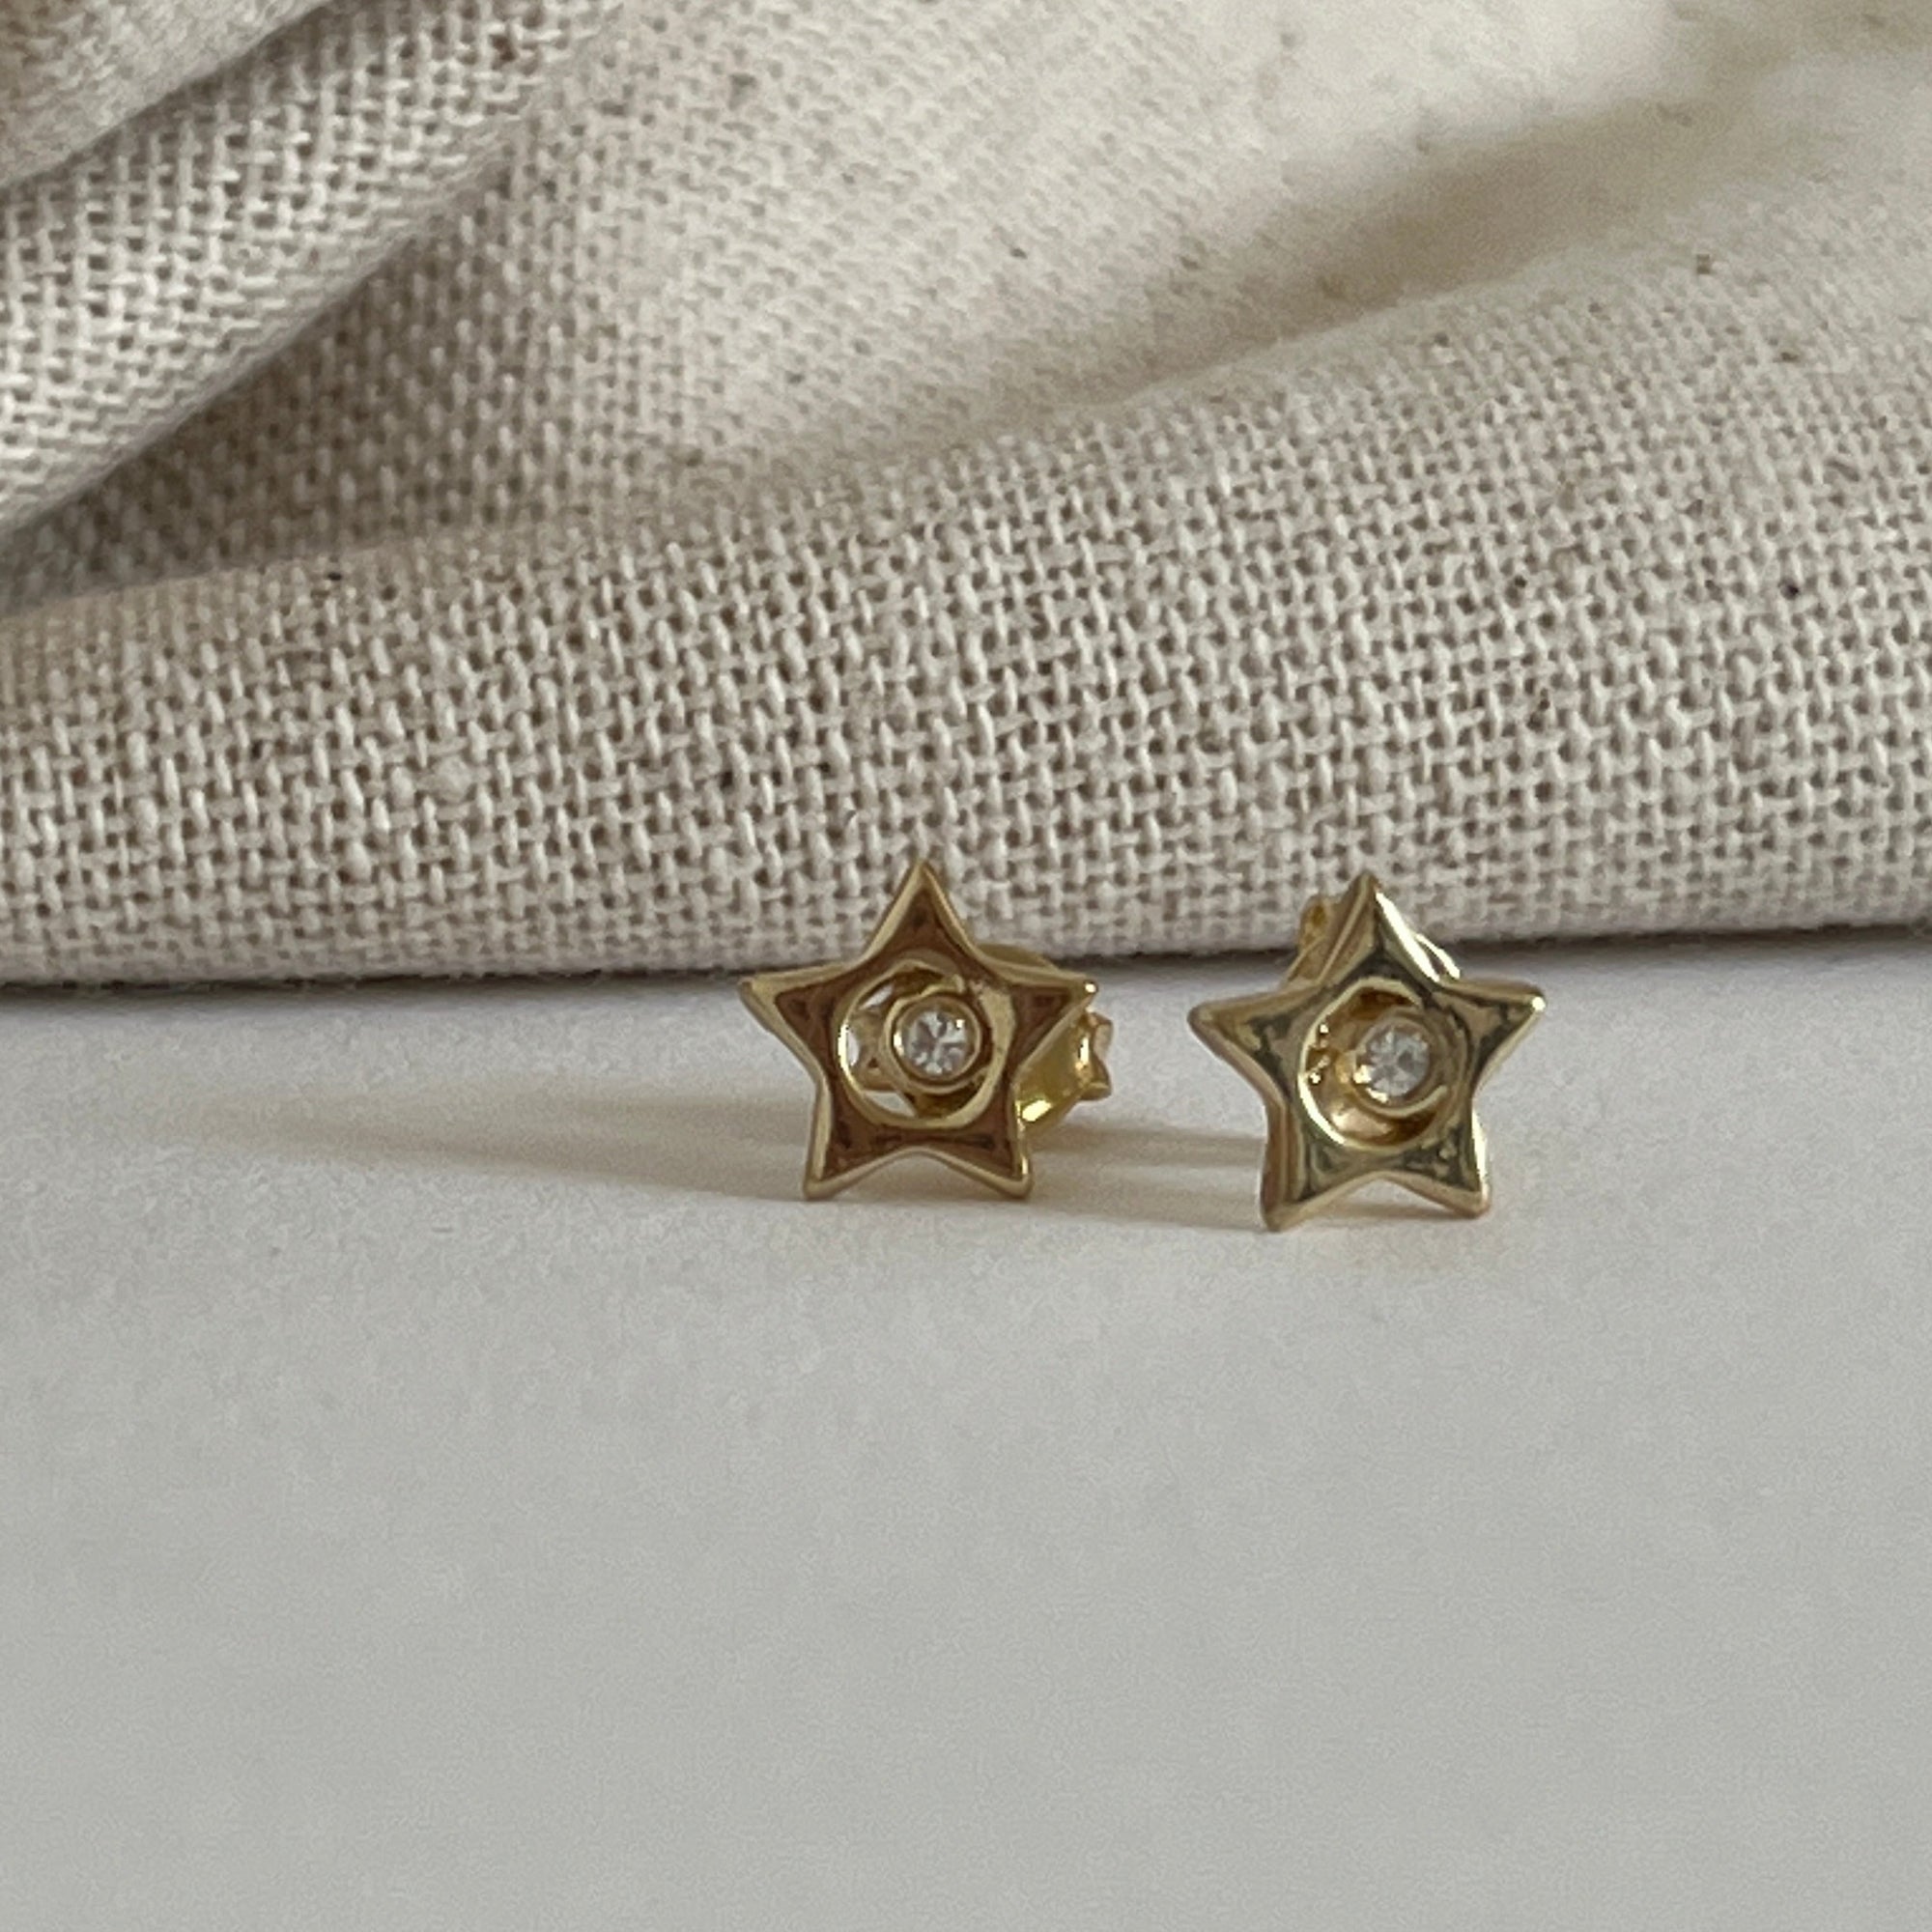 gold filled star studs with sparkle in middle.